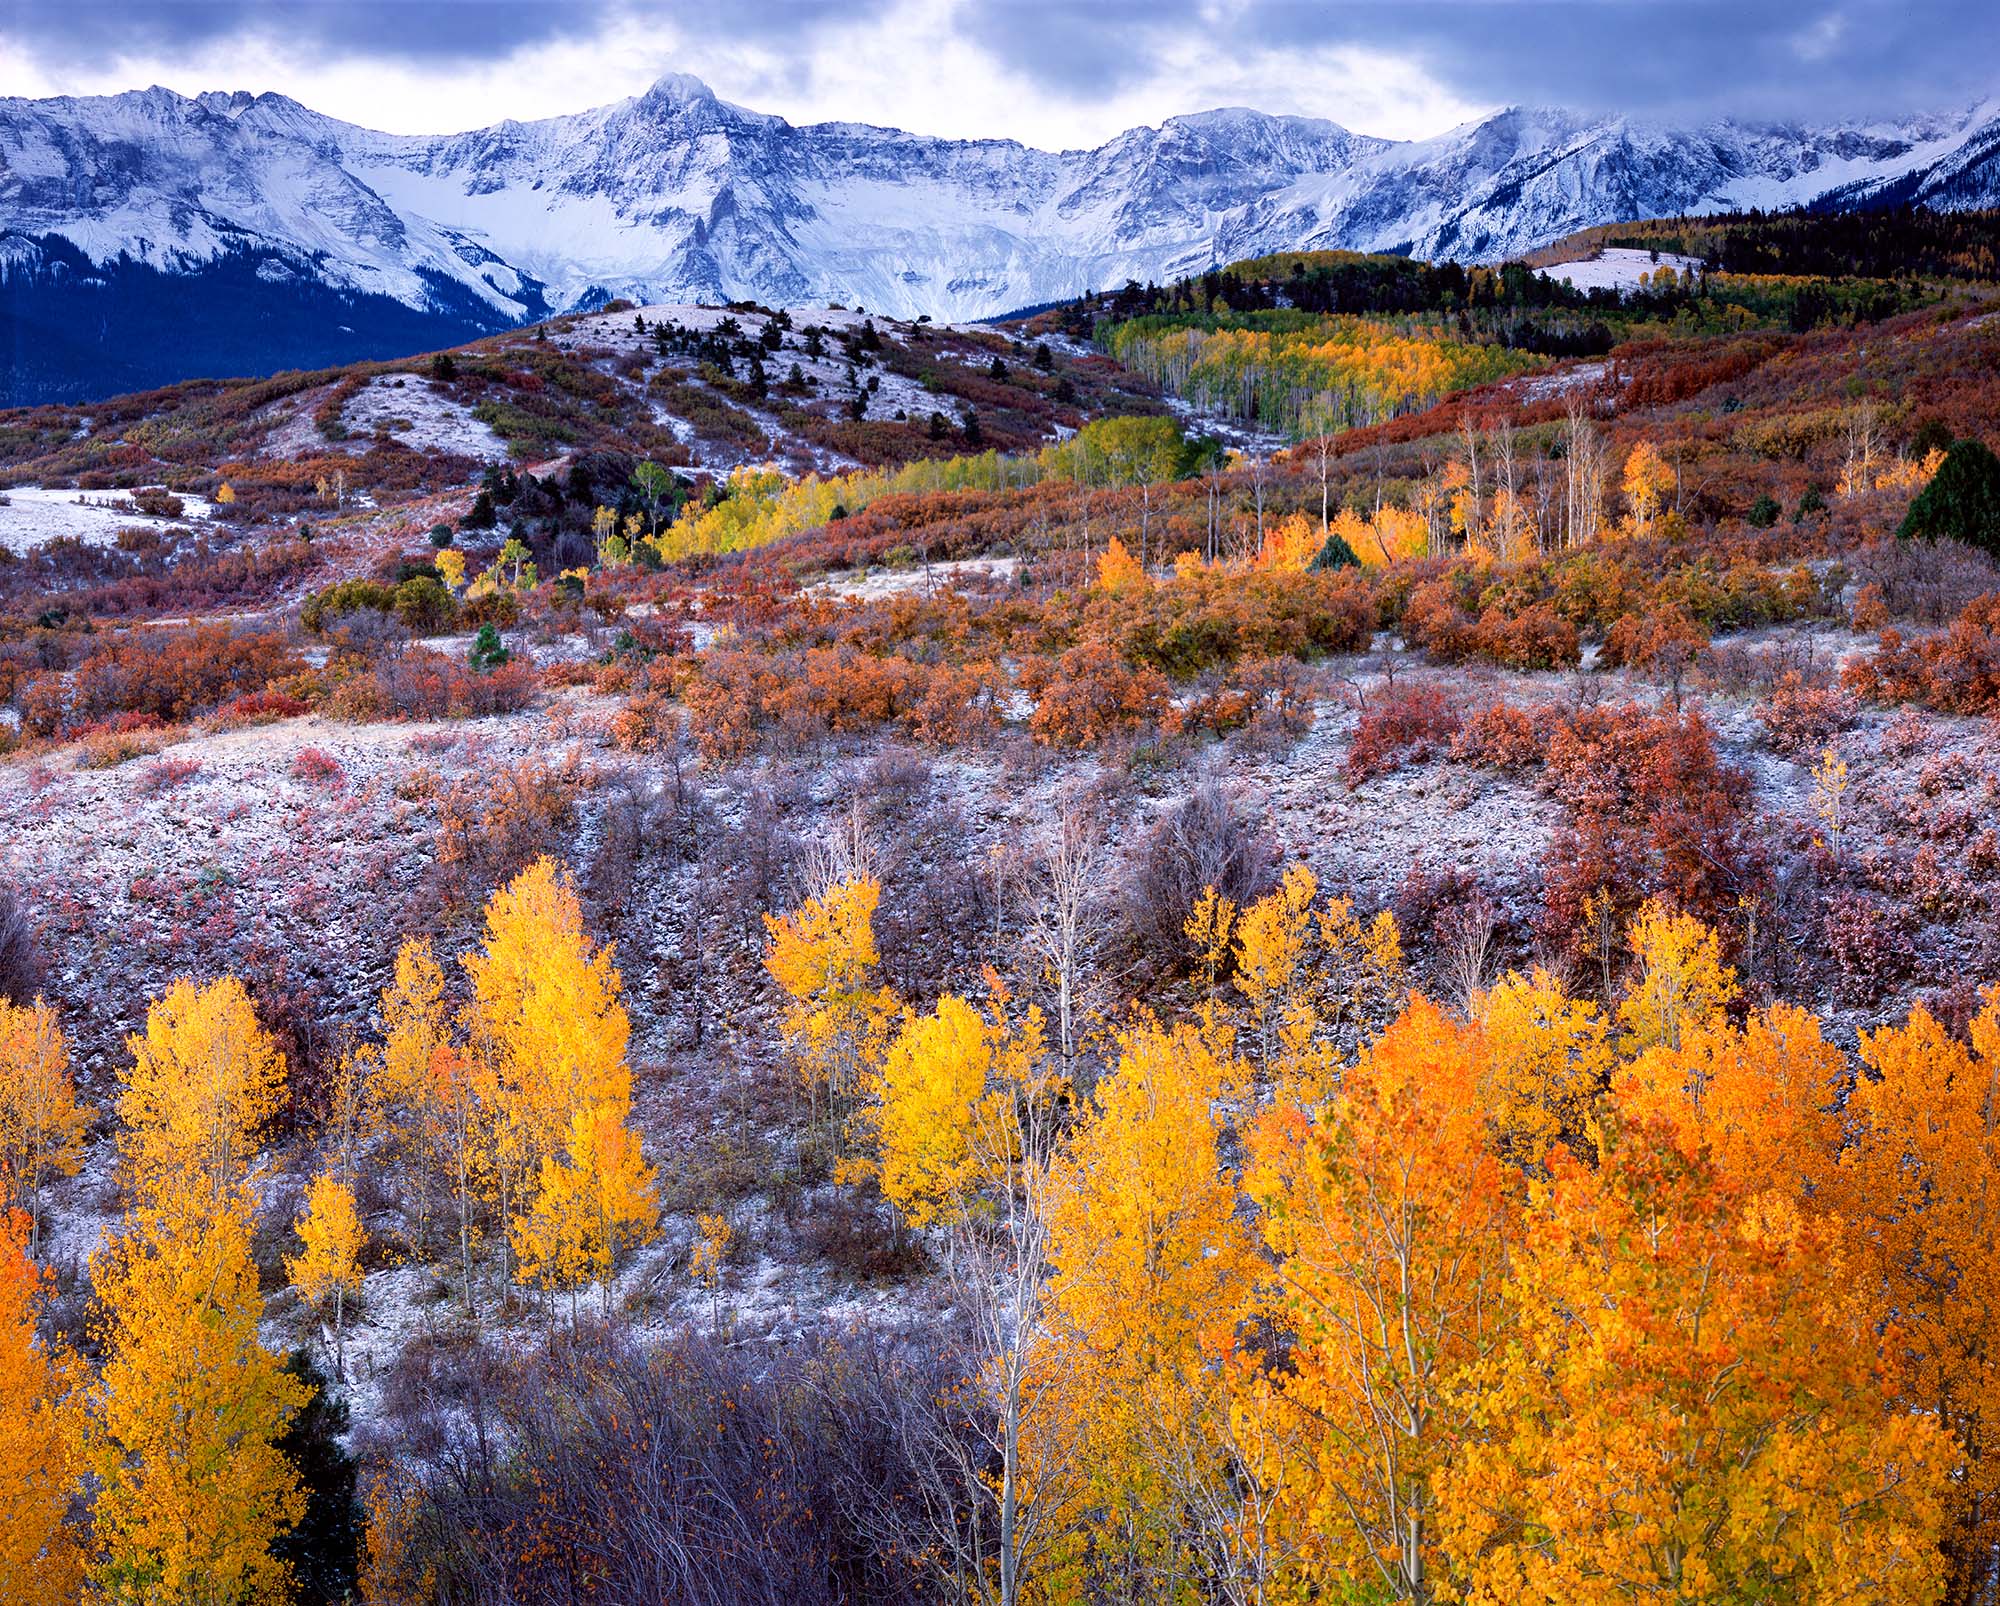 This image captures the majestic San Juan Mountains in Colorado as seen from Dallas Divide during the vibrant fall season. The...